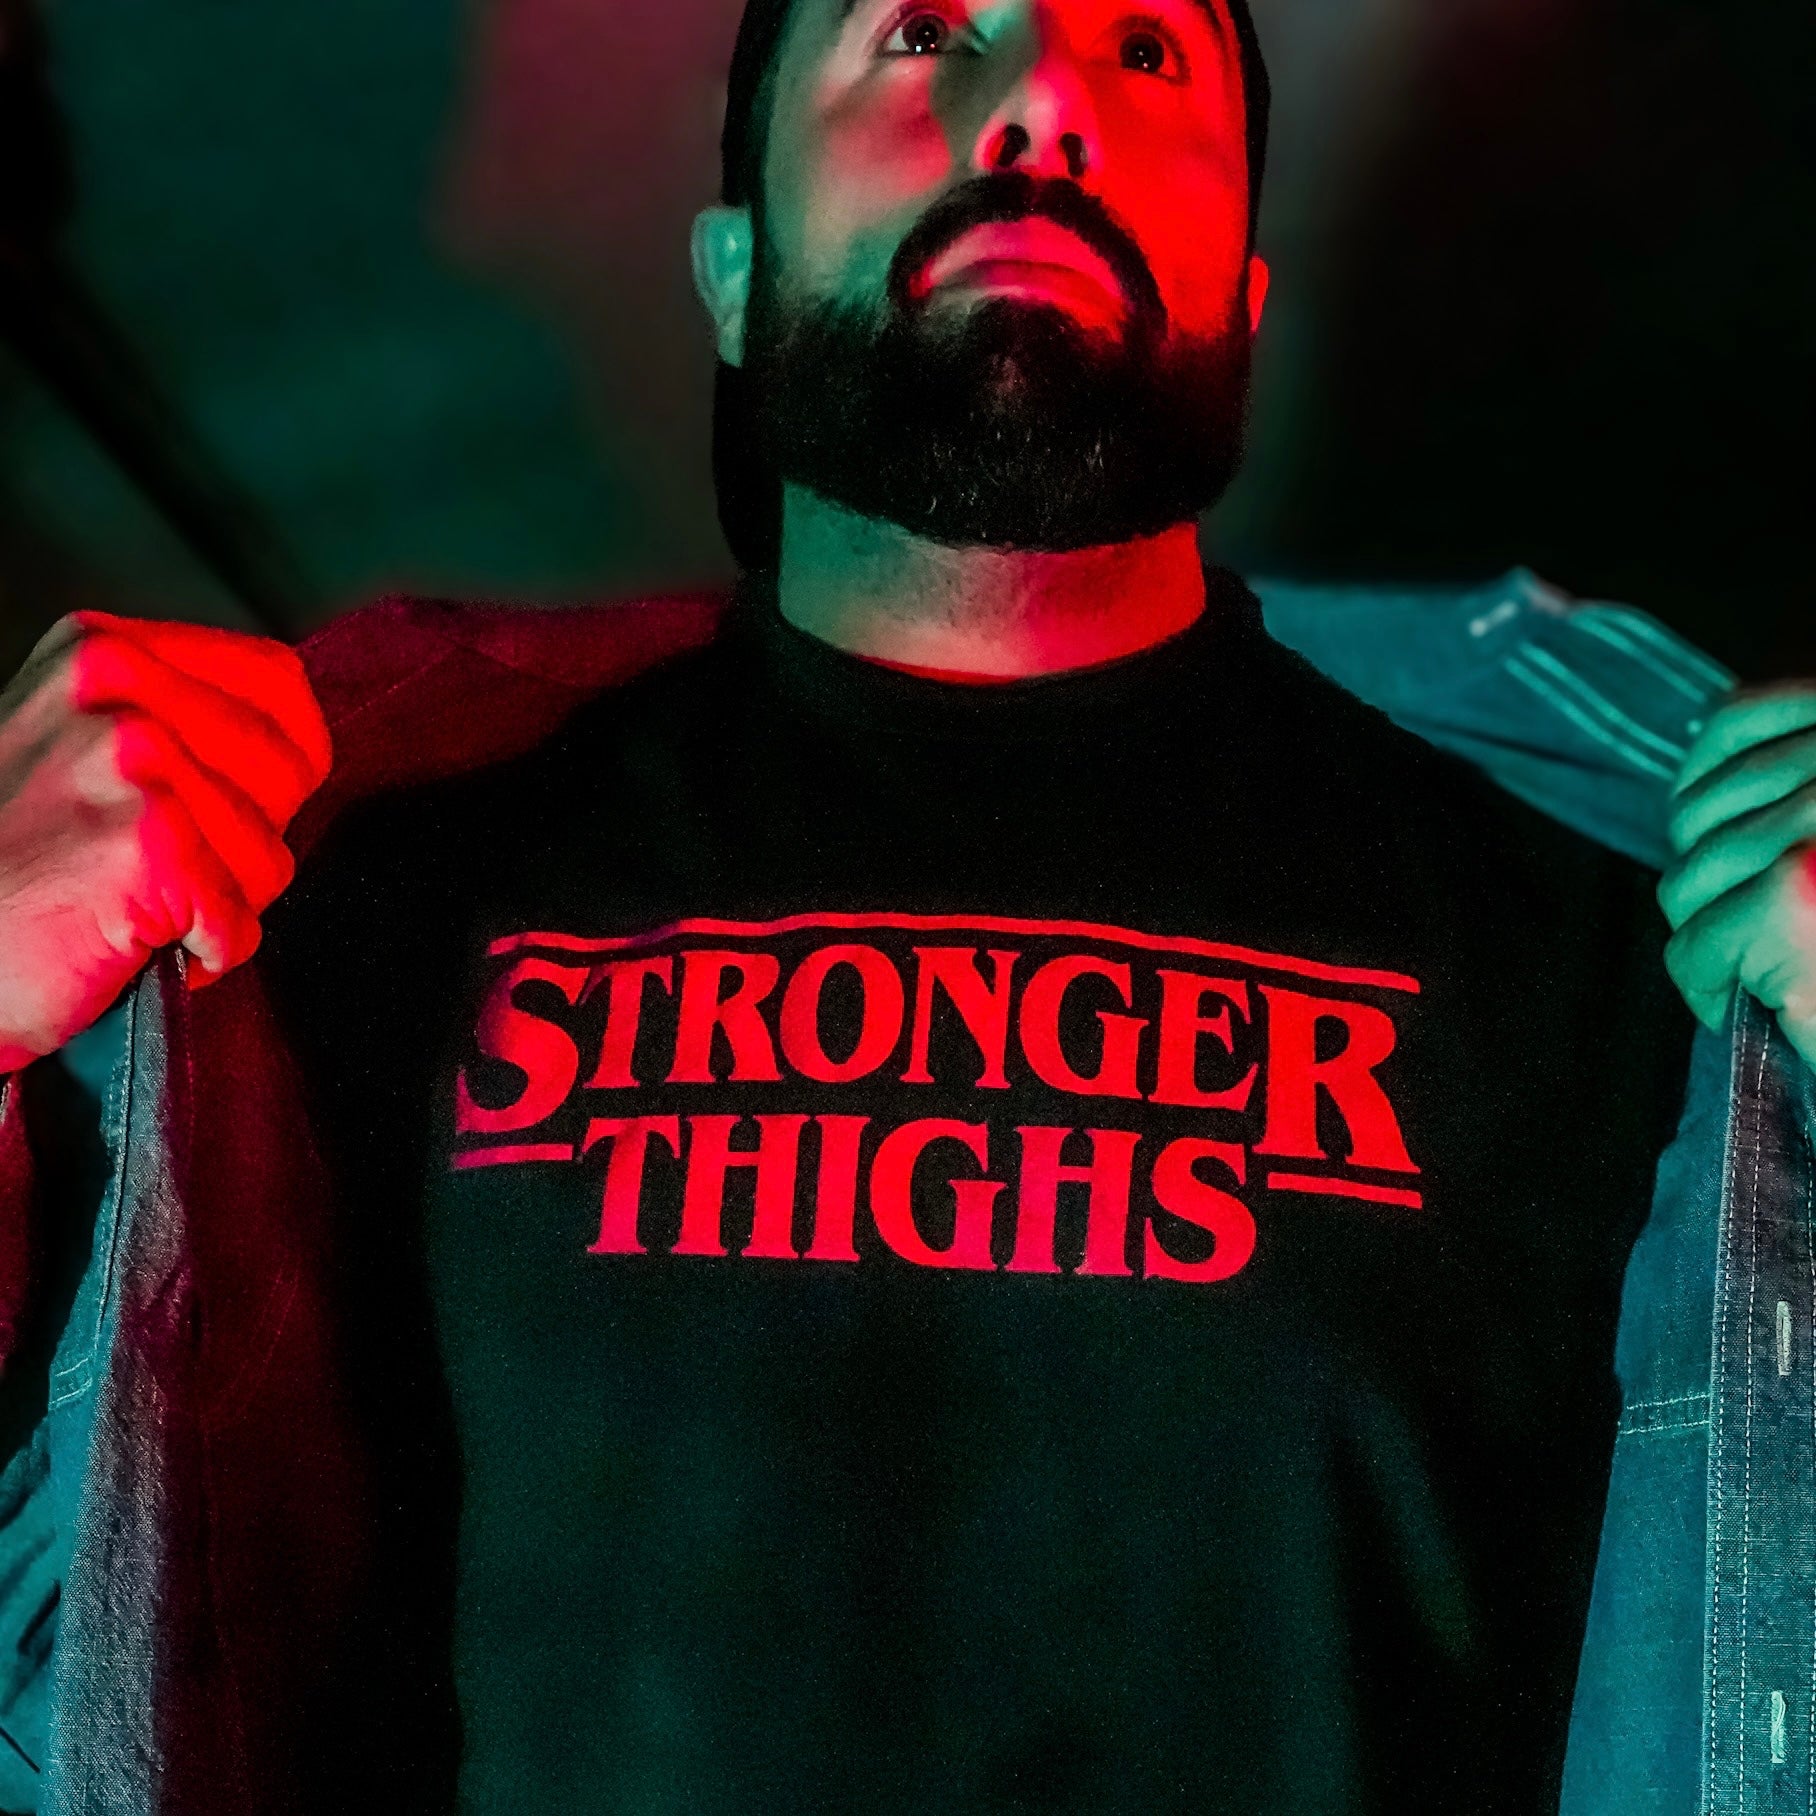 “Stronger Thighs" - Tee